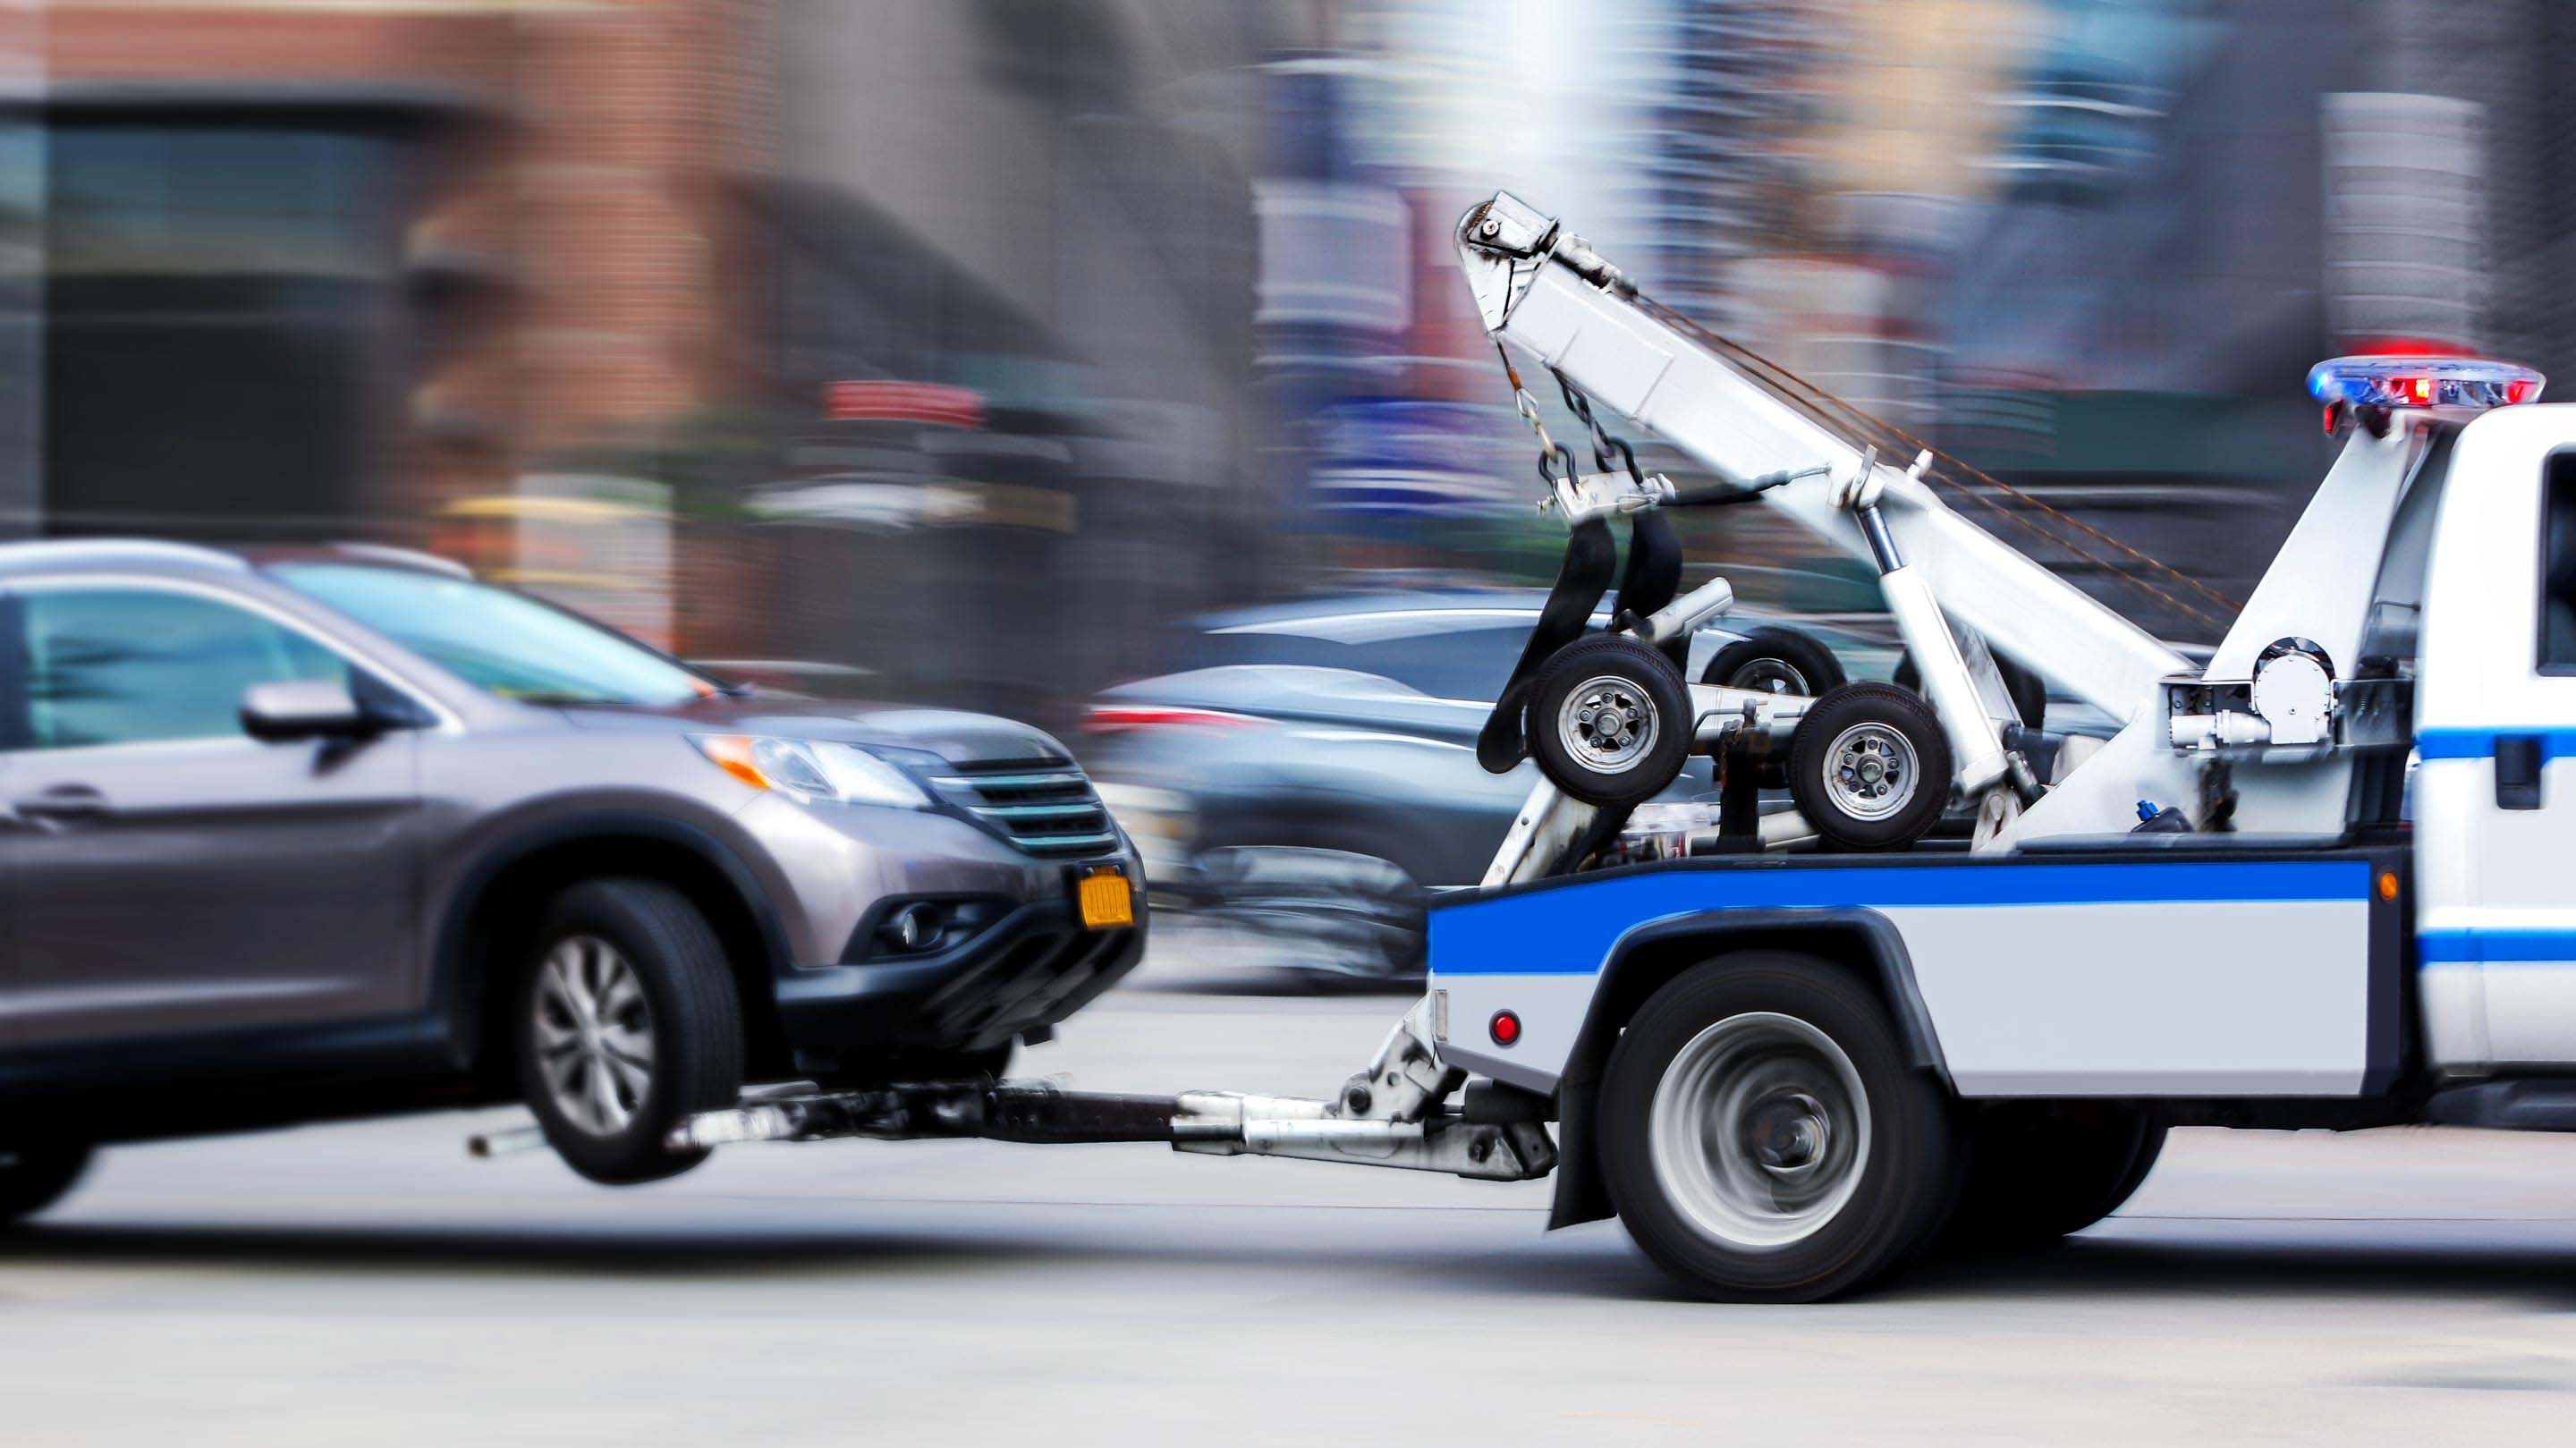 Grey SUV being towed on a busy street by a blue and white tow truck